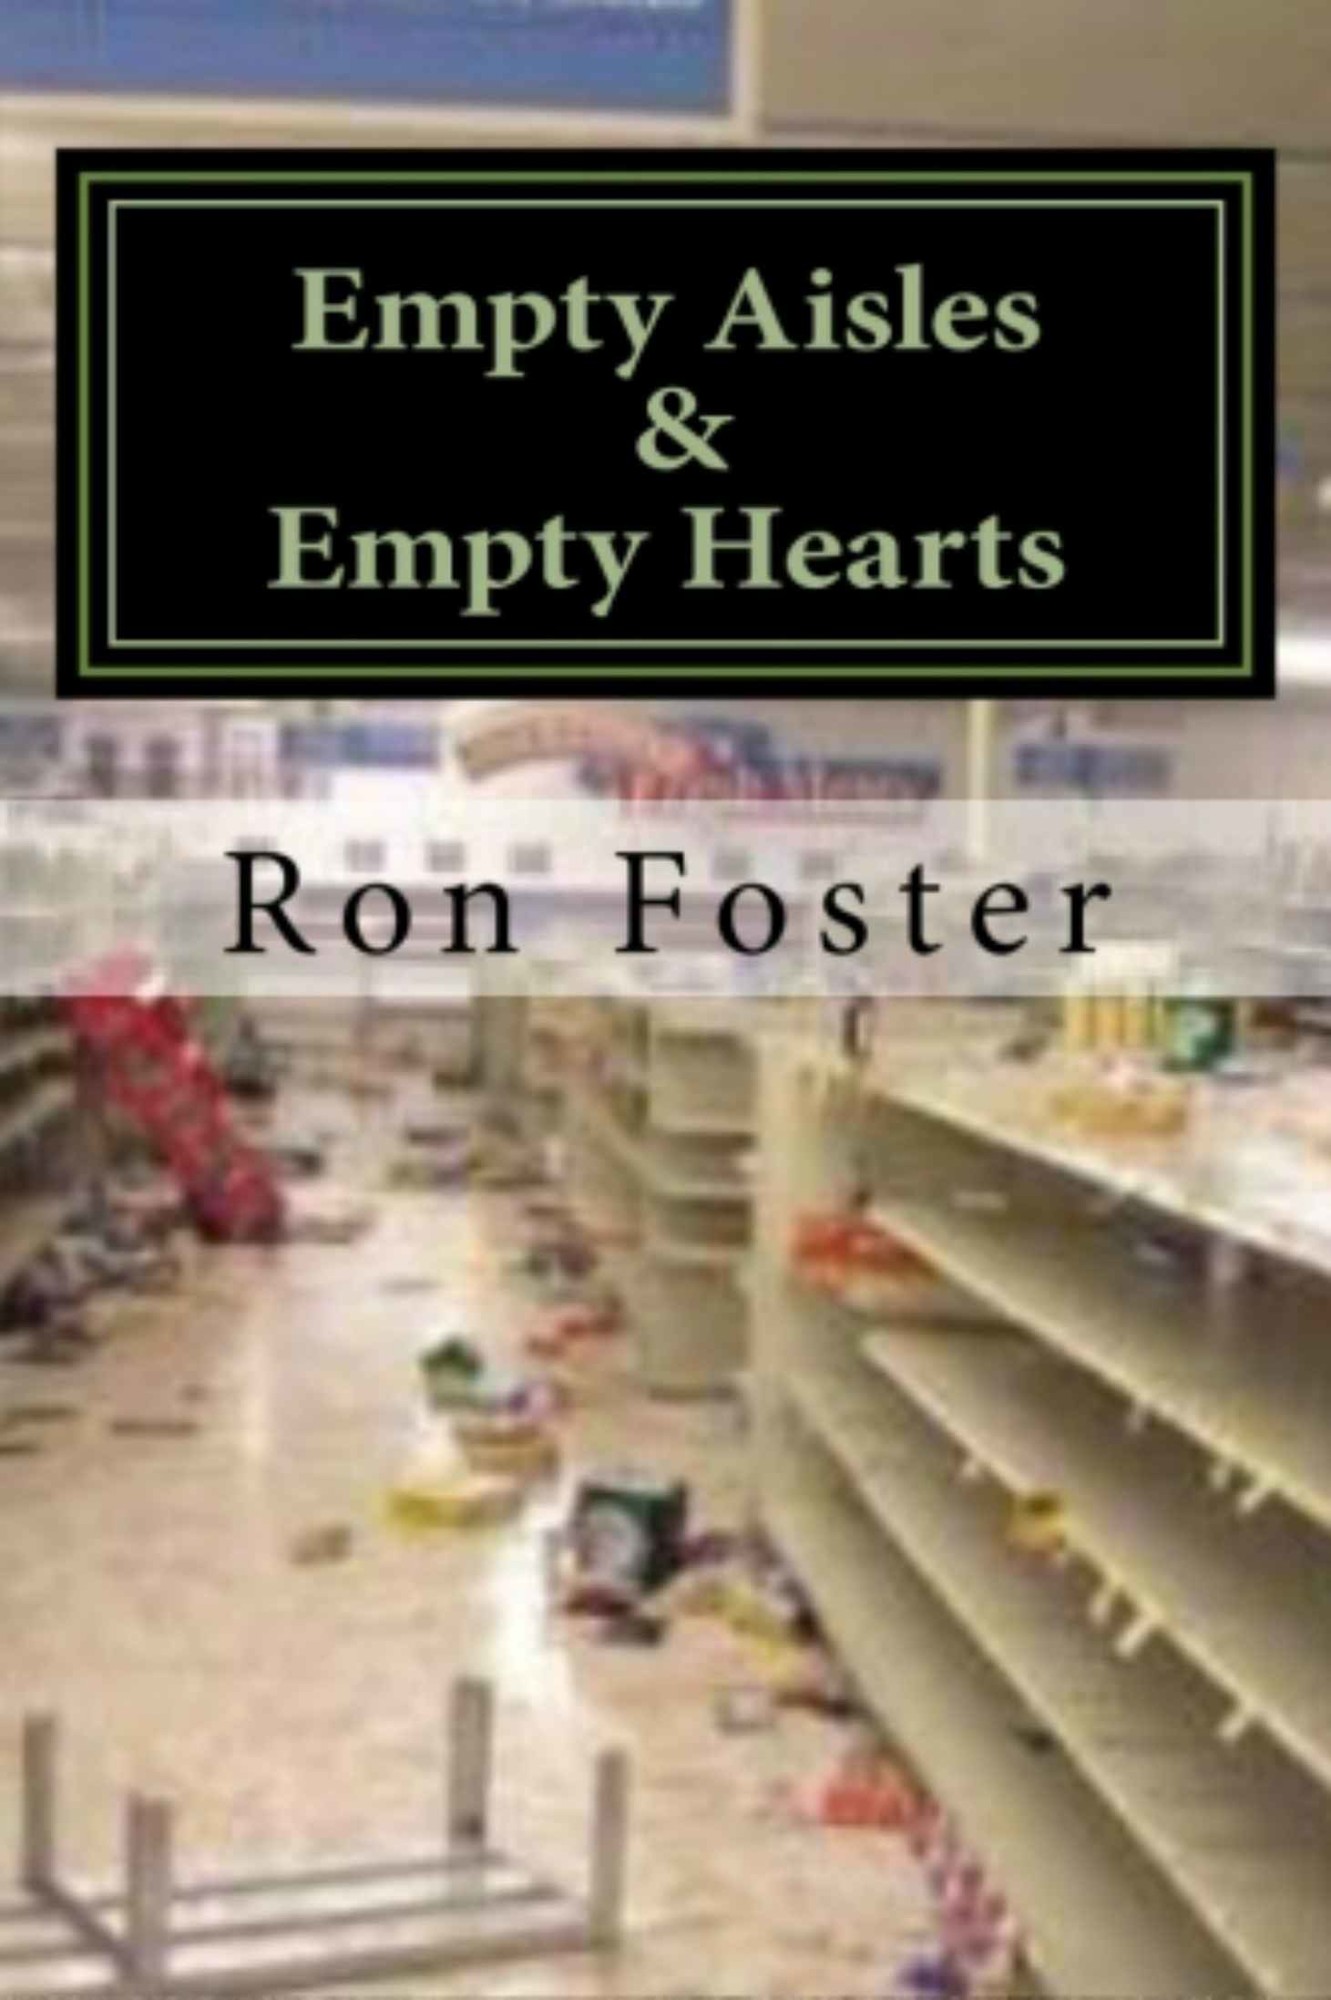 Empty Aisles & Empty Hearts (Preppers Perspective Book 3) by Ron Foster